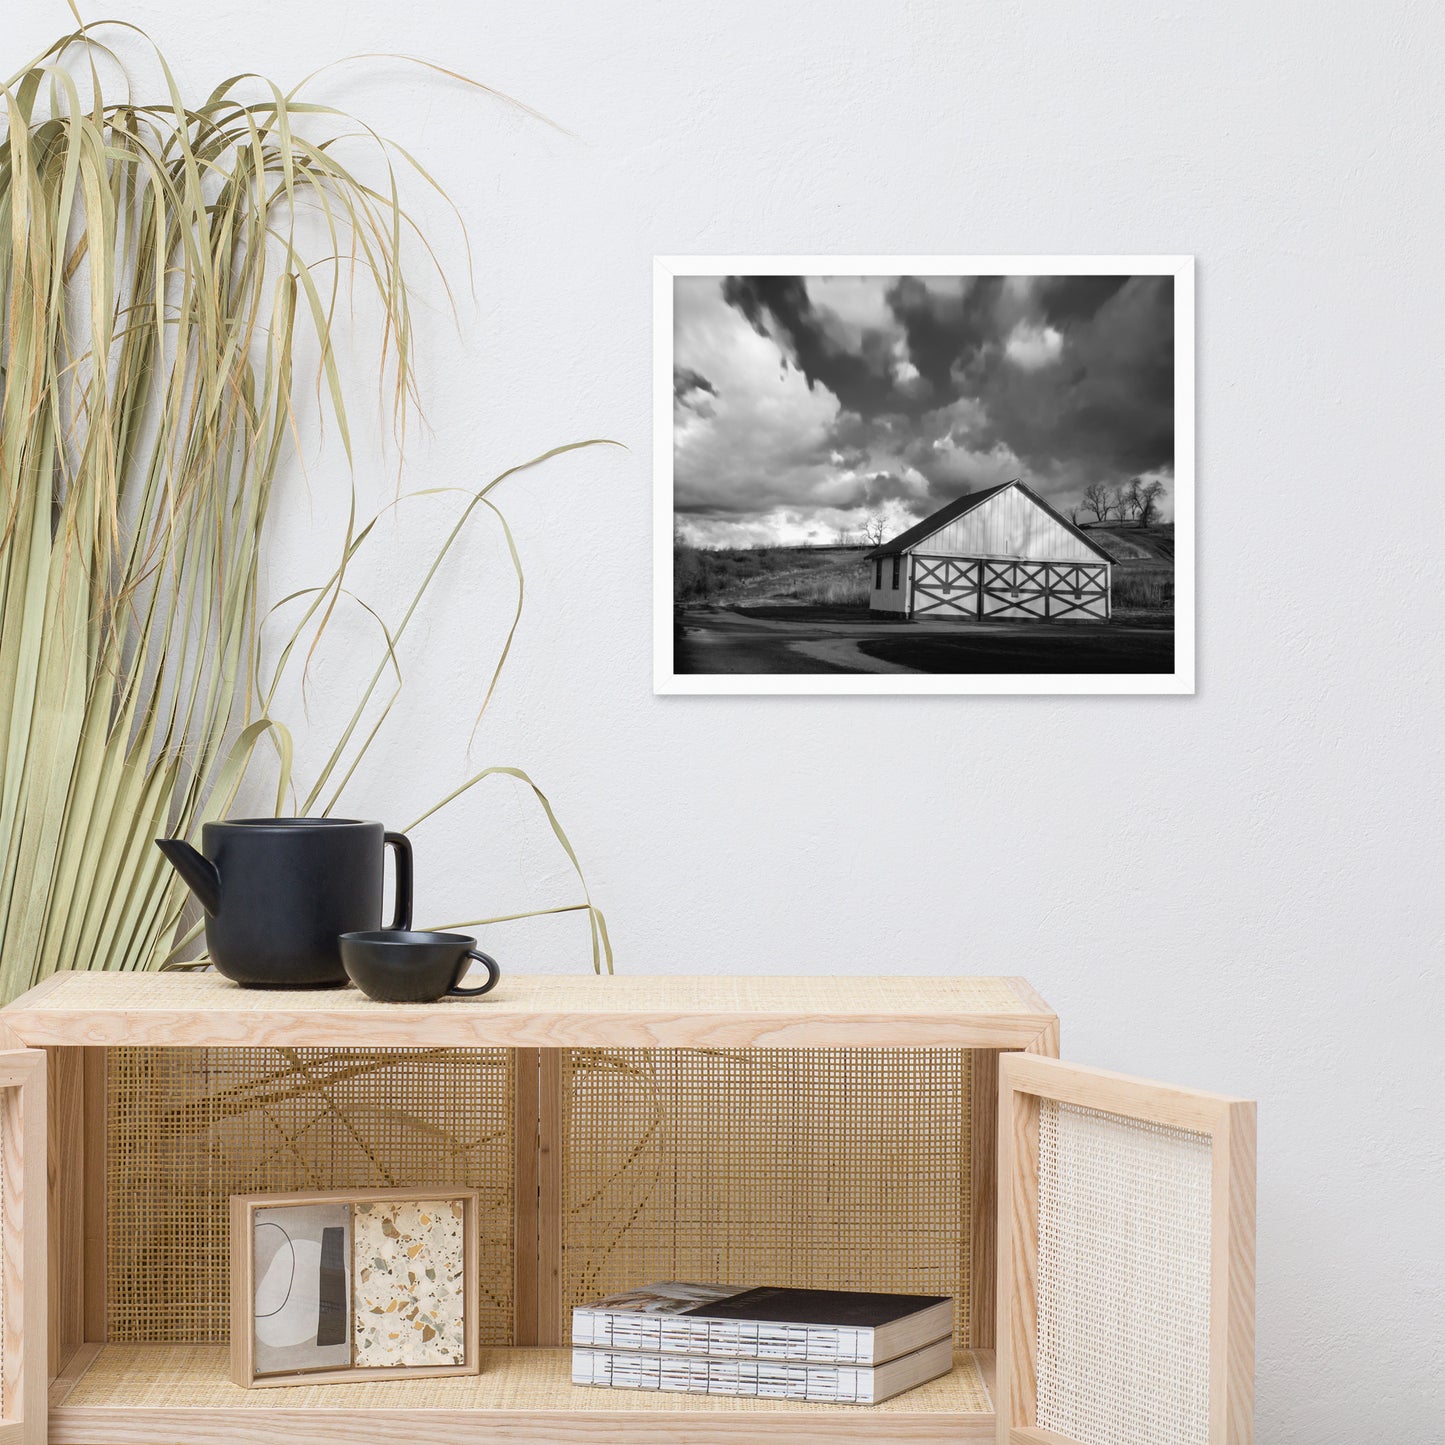 Master Bedroom Wall Decor: Aging Barn in the Morning Sun in Black and White - Rural / Country Style Landscape / Nature Photograph  Framed Wall Art Print - Wall Decor - Artwork